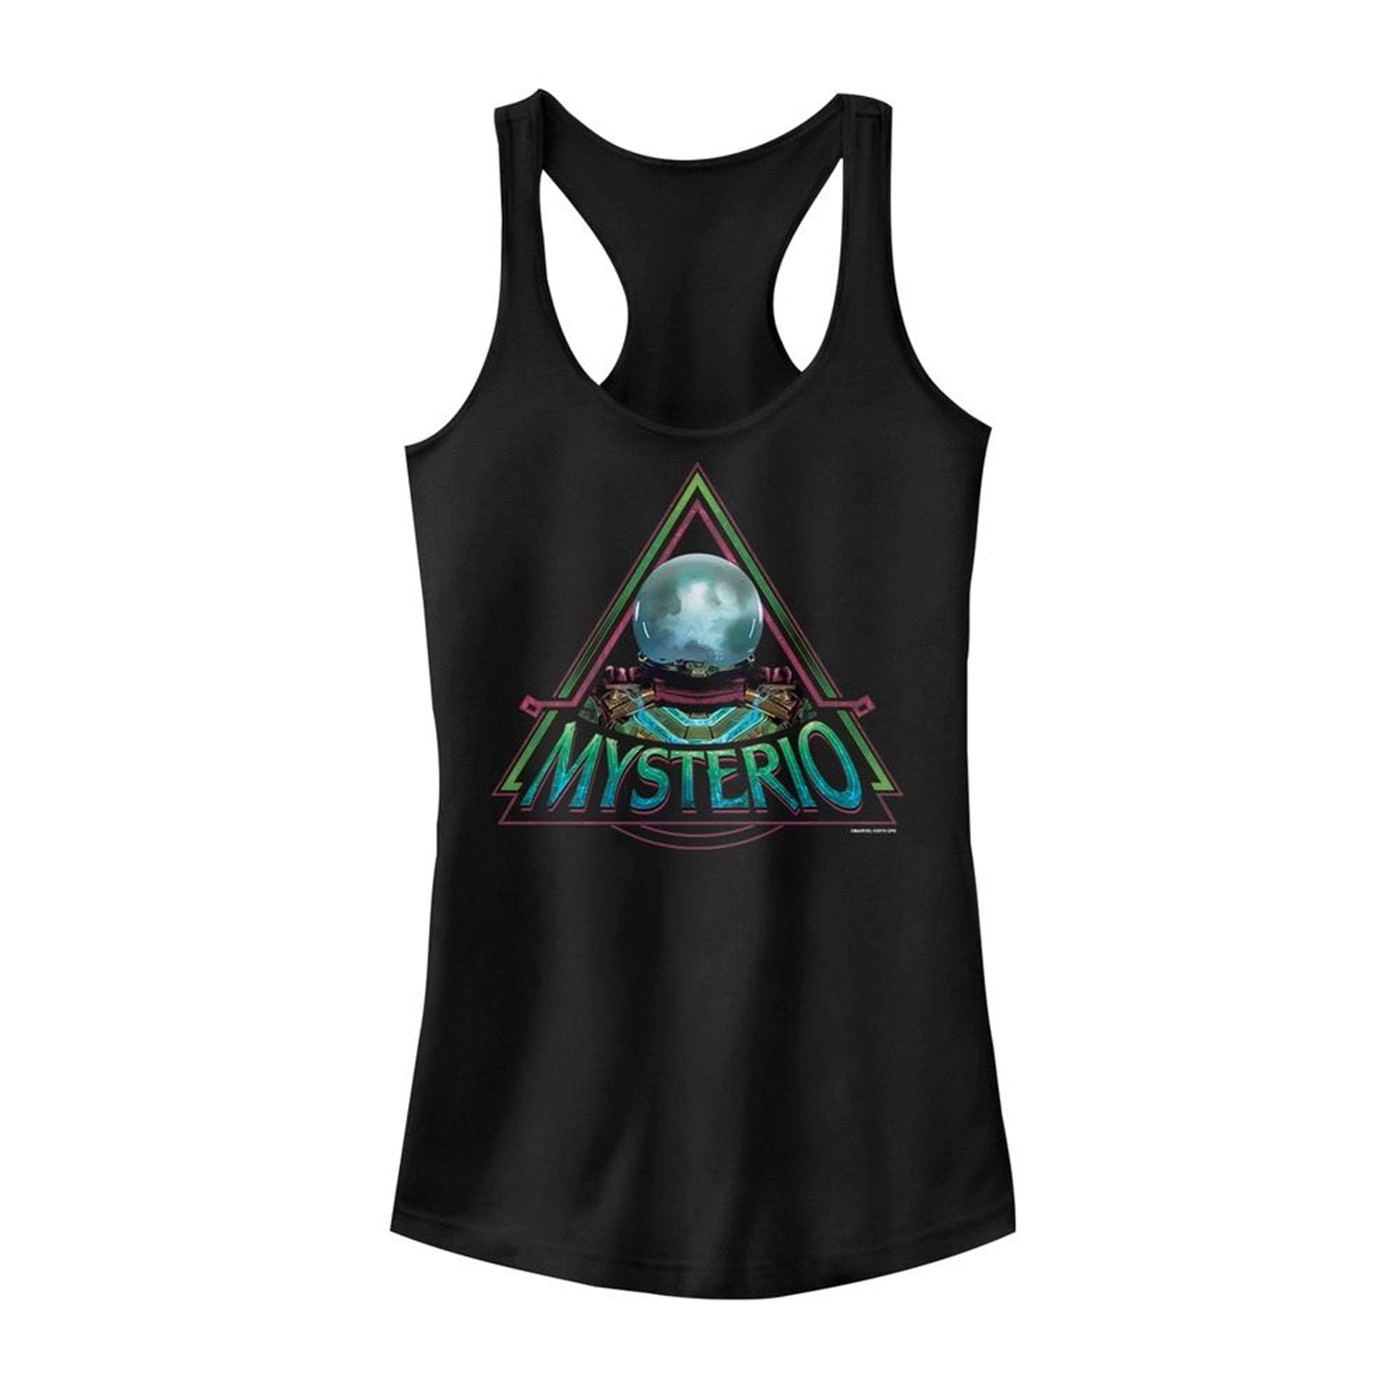 Spider-Man: Far From Home Mysterio Crystal Women's Tank Top